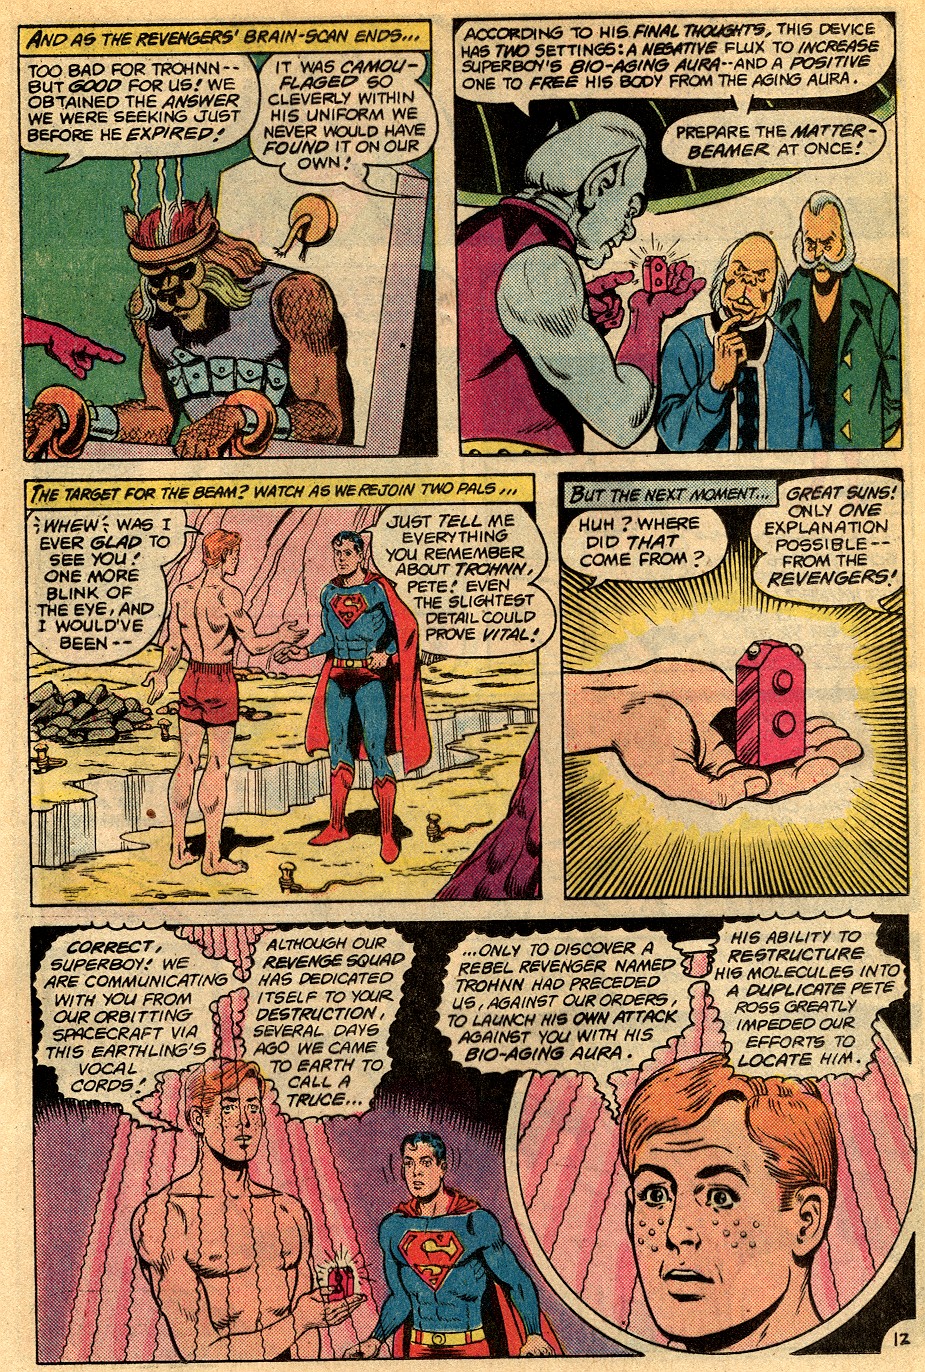 The New Adventures of Superboy 33 Page 16